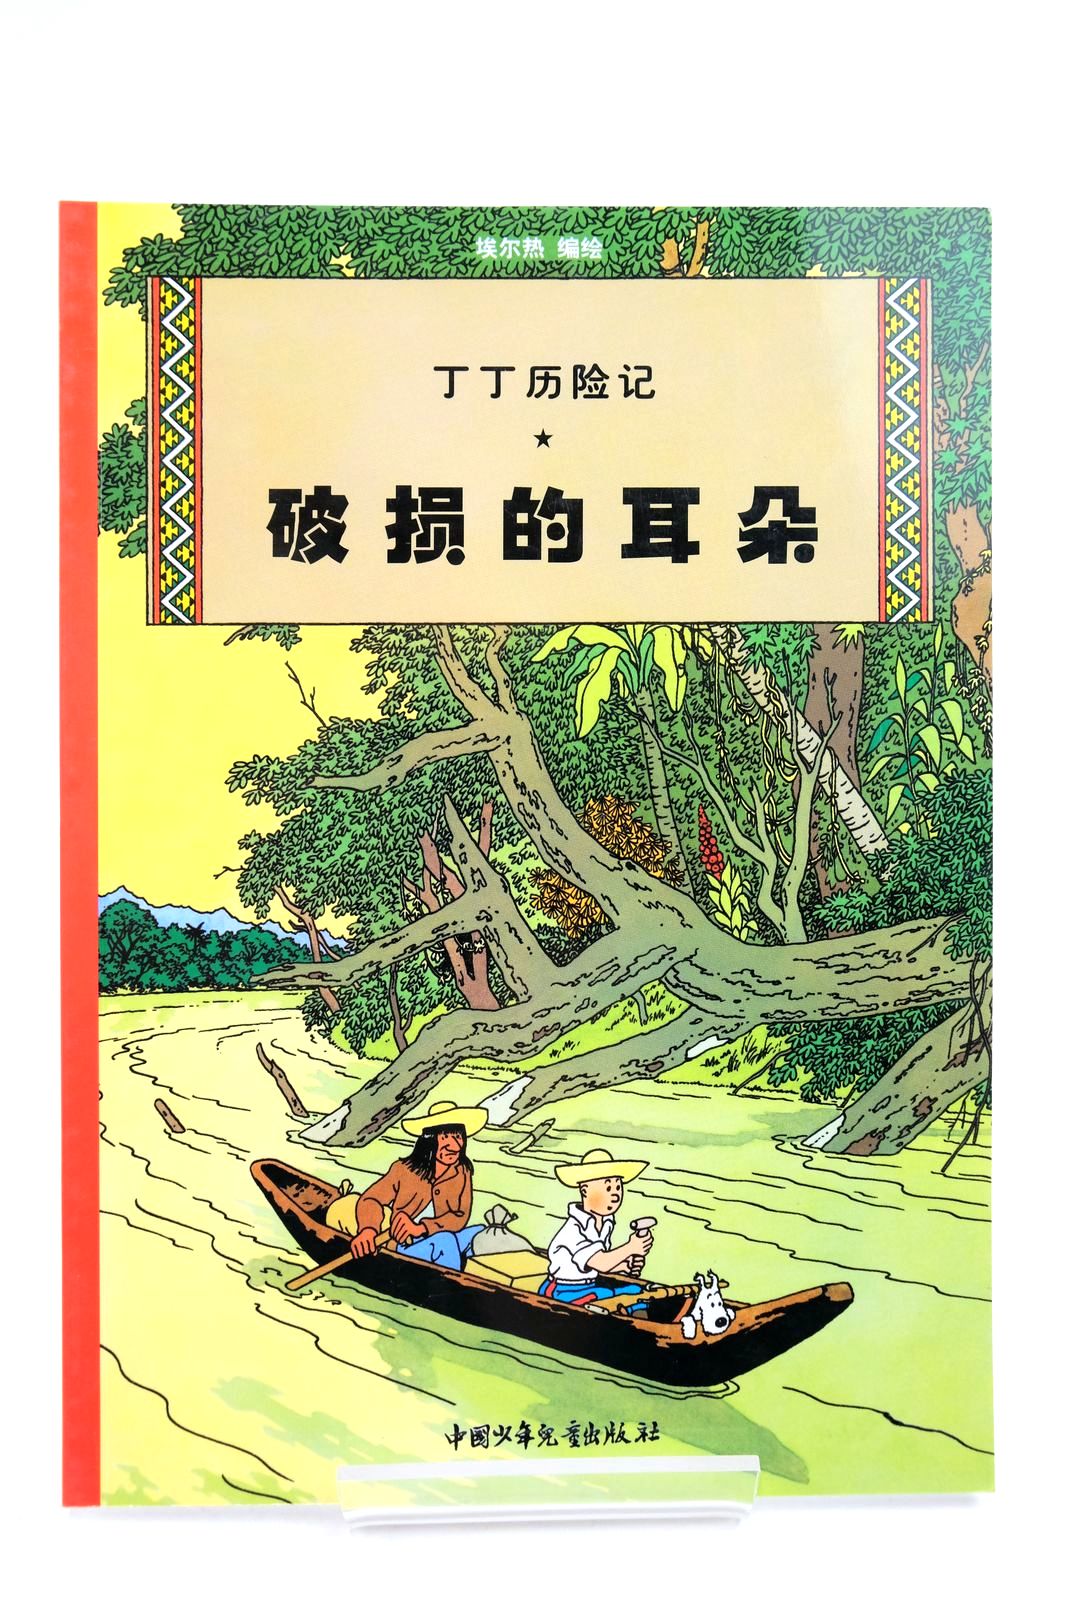 Photo of THE ADVENTURES OF TINTIN: THE BROKEN EAR (CHINESE LANGUAGE EDITION) written by Herge, illustrated by Herge, published by China Press (STOCK CODE: 2140345)  for sale by Stella & Rose's Books